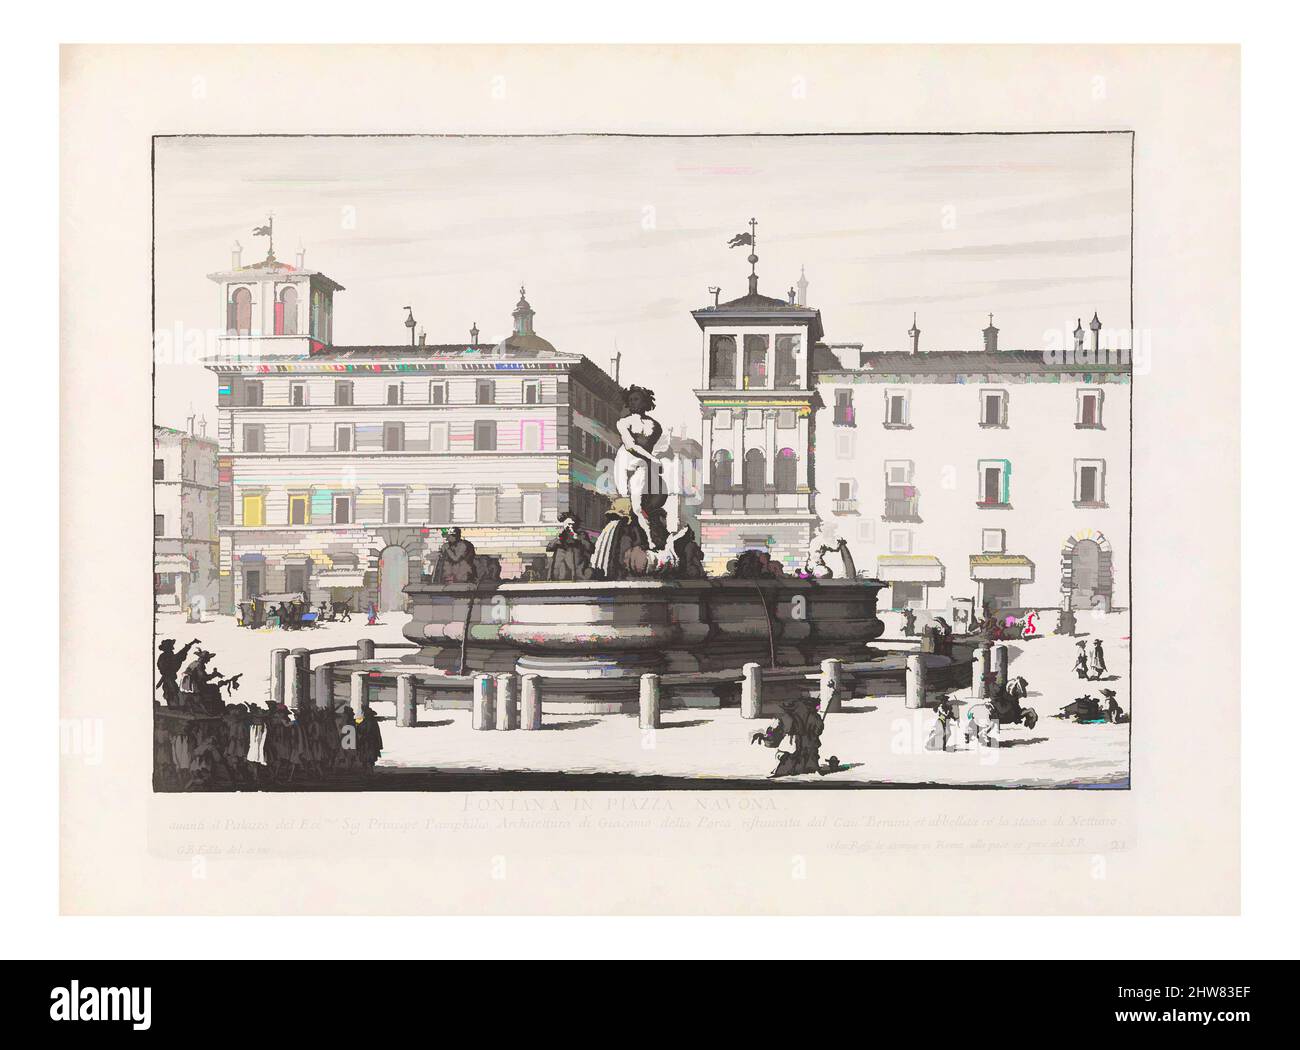 Art inspired by Fontana in Piazza Navona Fontana del Moro. From 'La Fontane di Roma nelle Piazze e Luoghi Publici (...)'., 1691 or after, Etching, Plate: 8 1/4 x 11 1/4 in. (21 x 28.6 cm), Giovanni Battista Falda (Italian, Valduggia 1643–1678 Rome), View of the Fountain of the Moor on, Classic works modernized by Artotop with a splash of modernity. Shapes, color and value, eye-catching visual impact on art. Emotions through freedom of artworks in a contemporary way. A timeless message pursuing a wildly creative new direction. Artists turning to the digital medium and creating the Artotop NFT Stock Photo